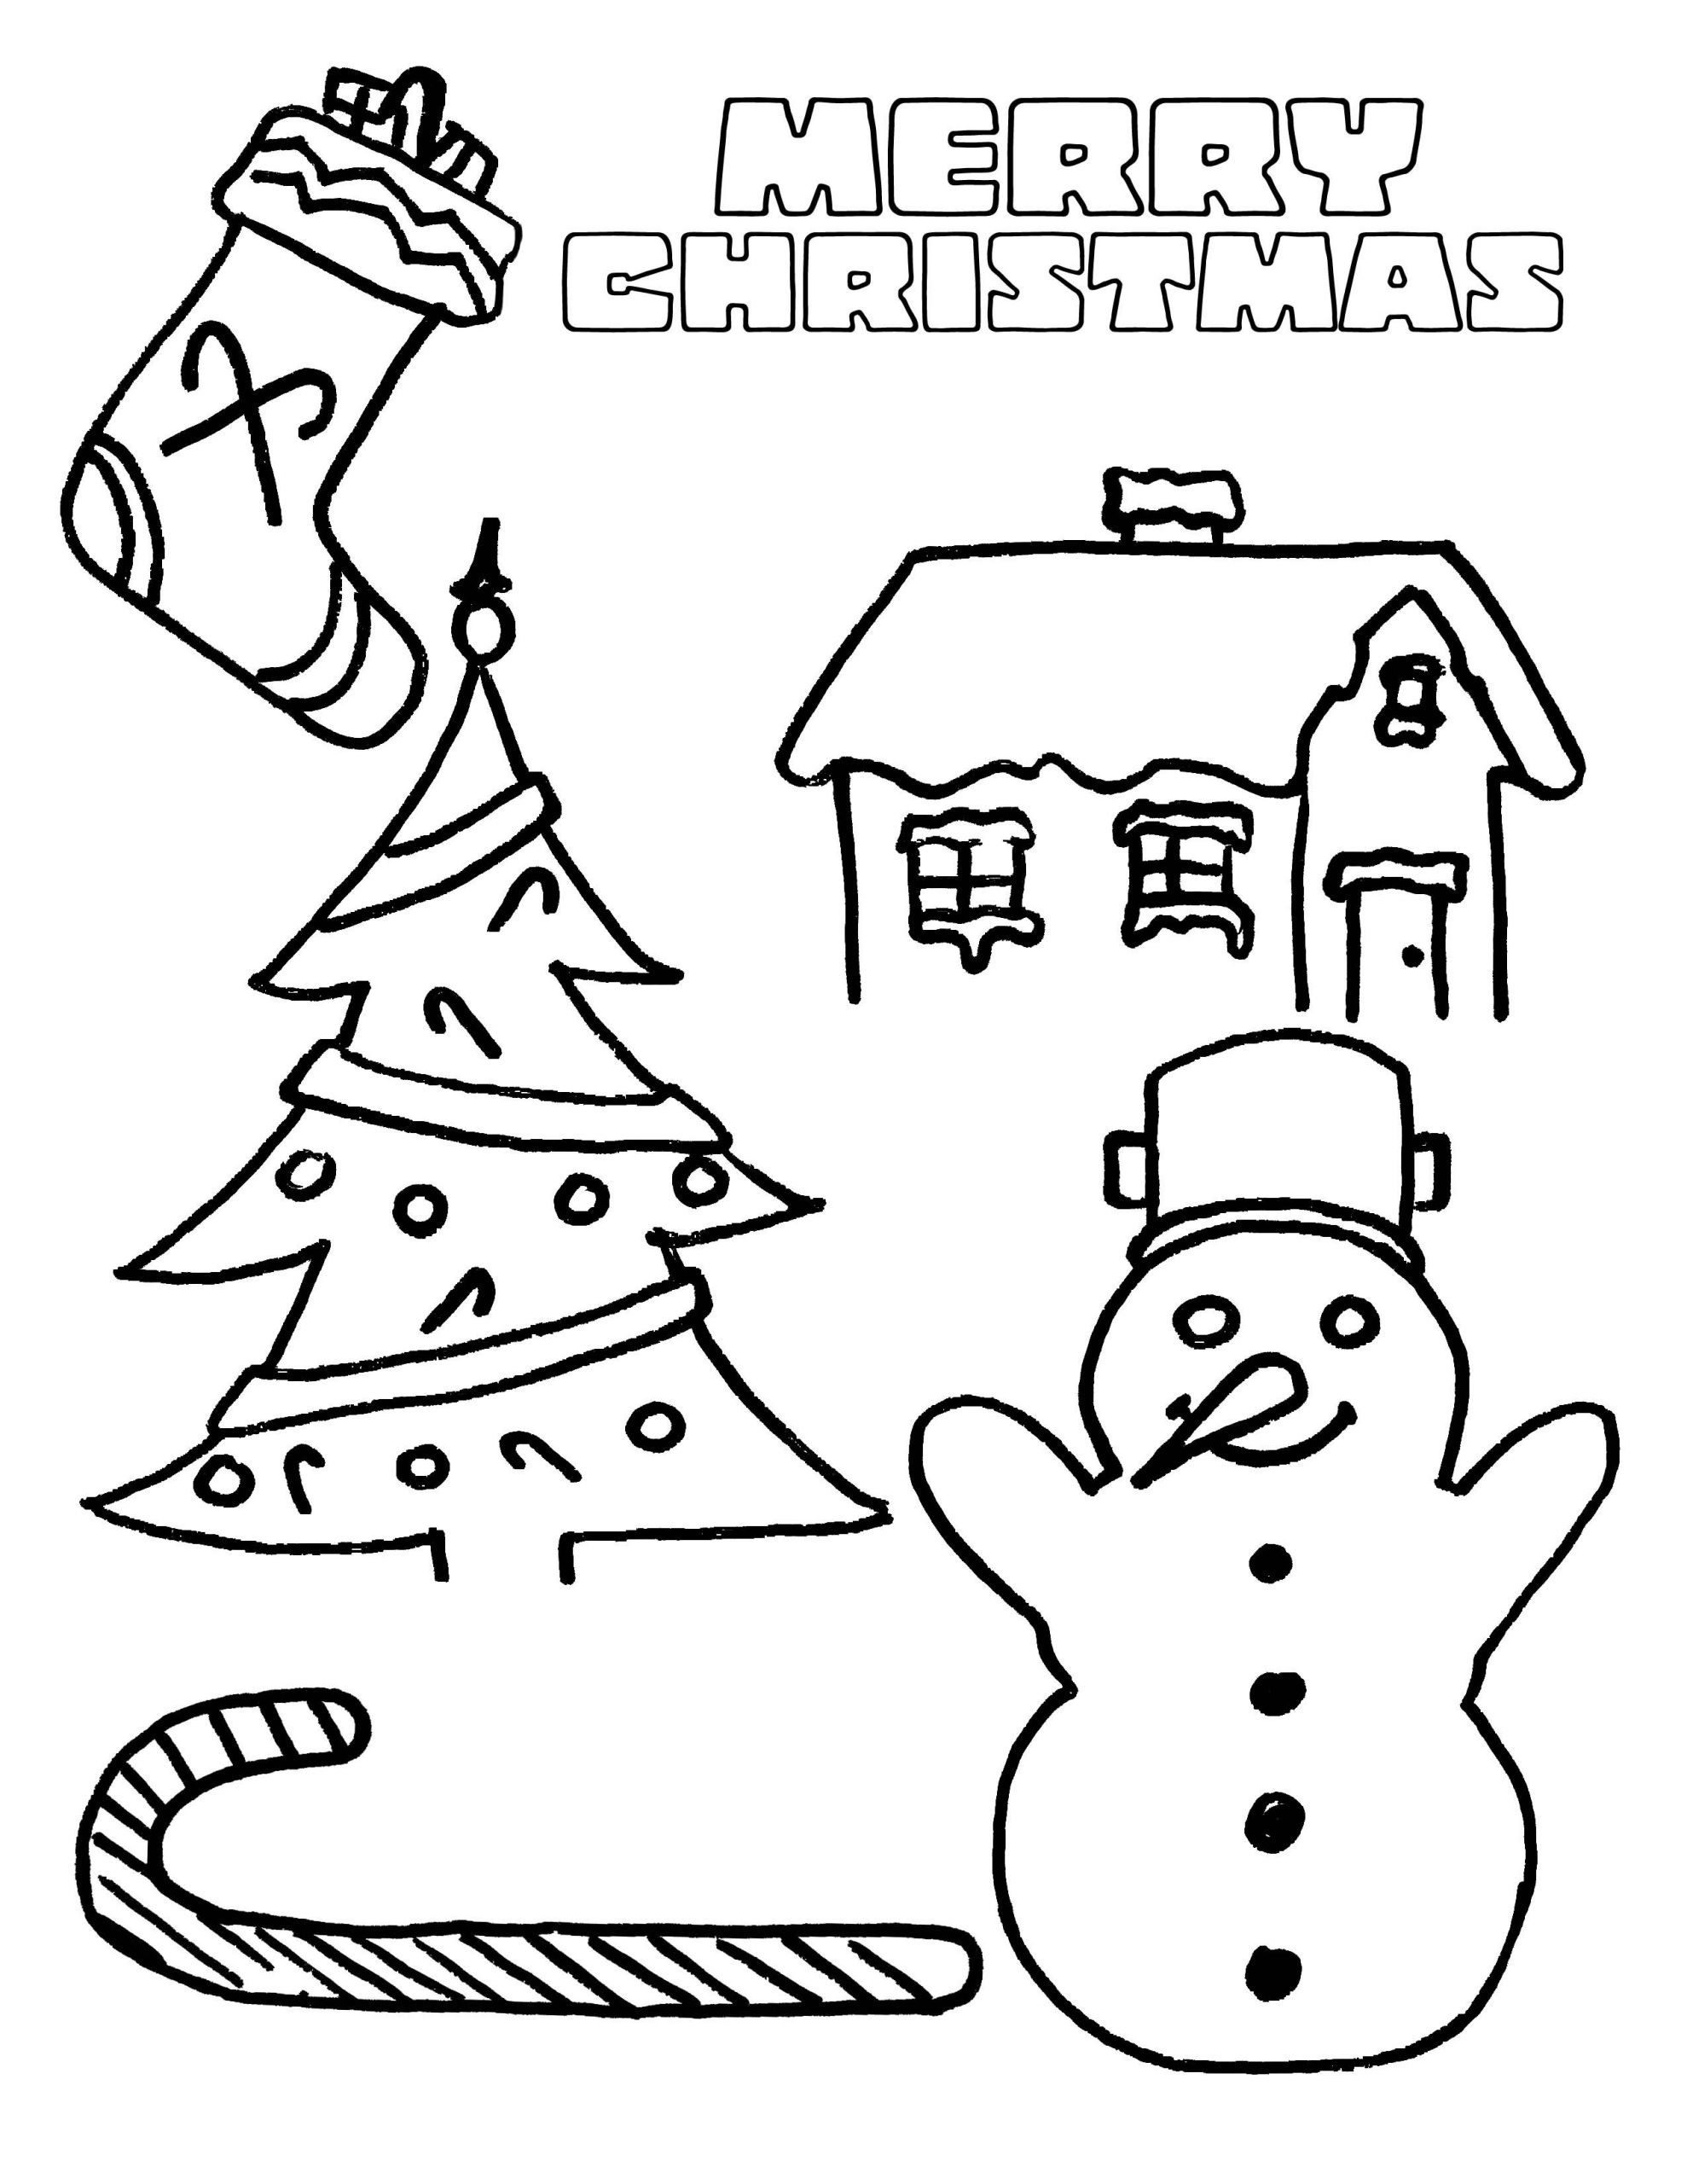 Christmas Coloring Pages For Children
 Party Simplicity free Christmas coloring page for kids